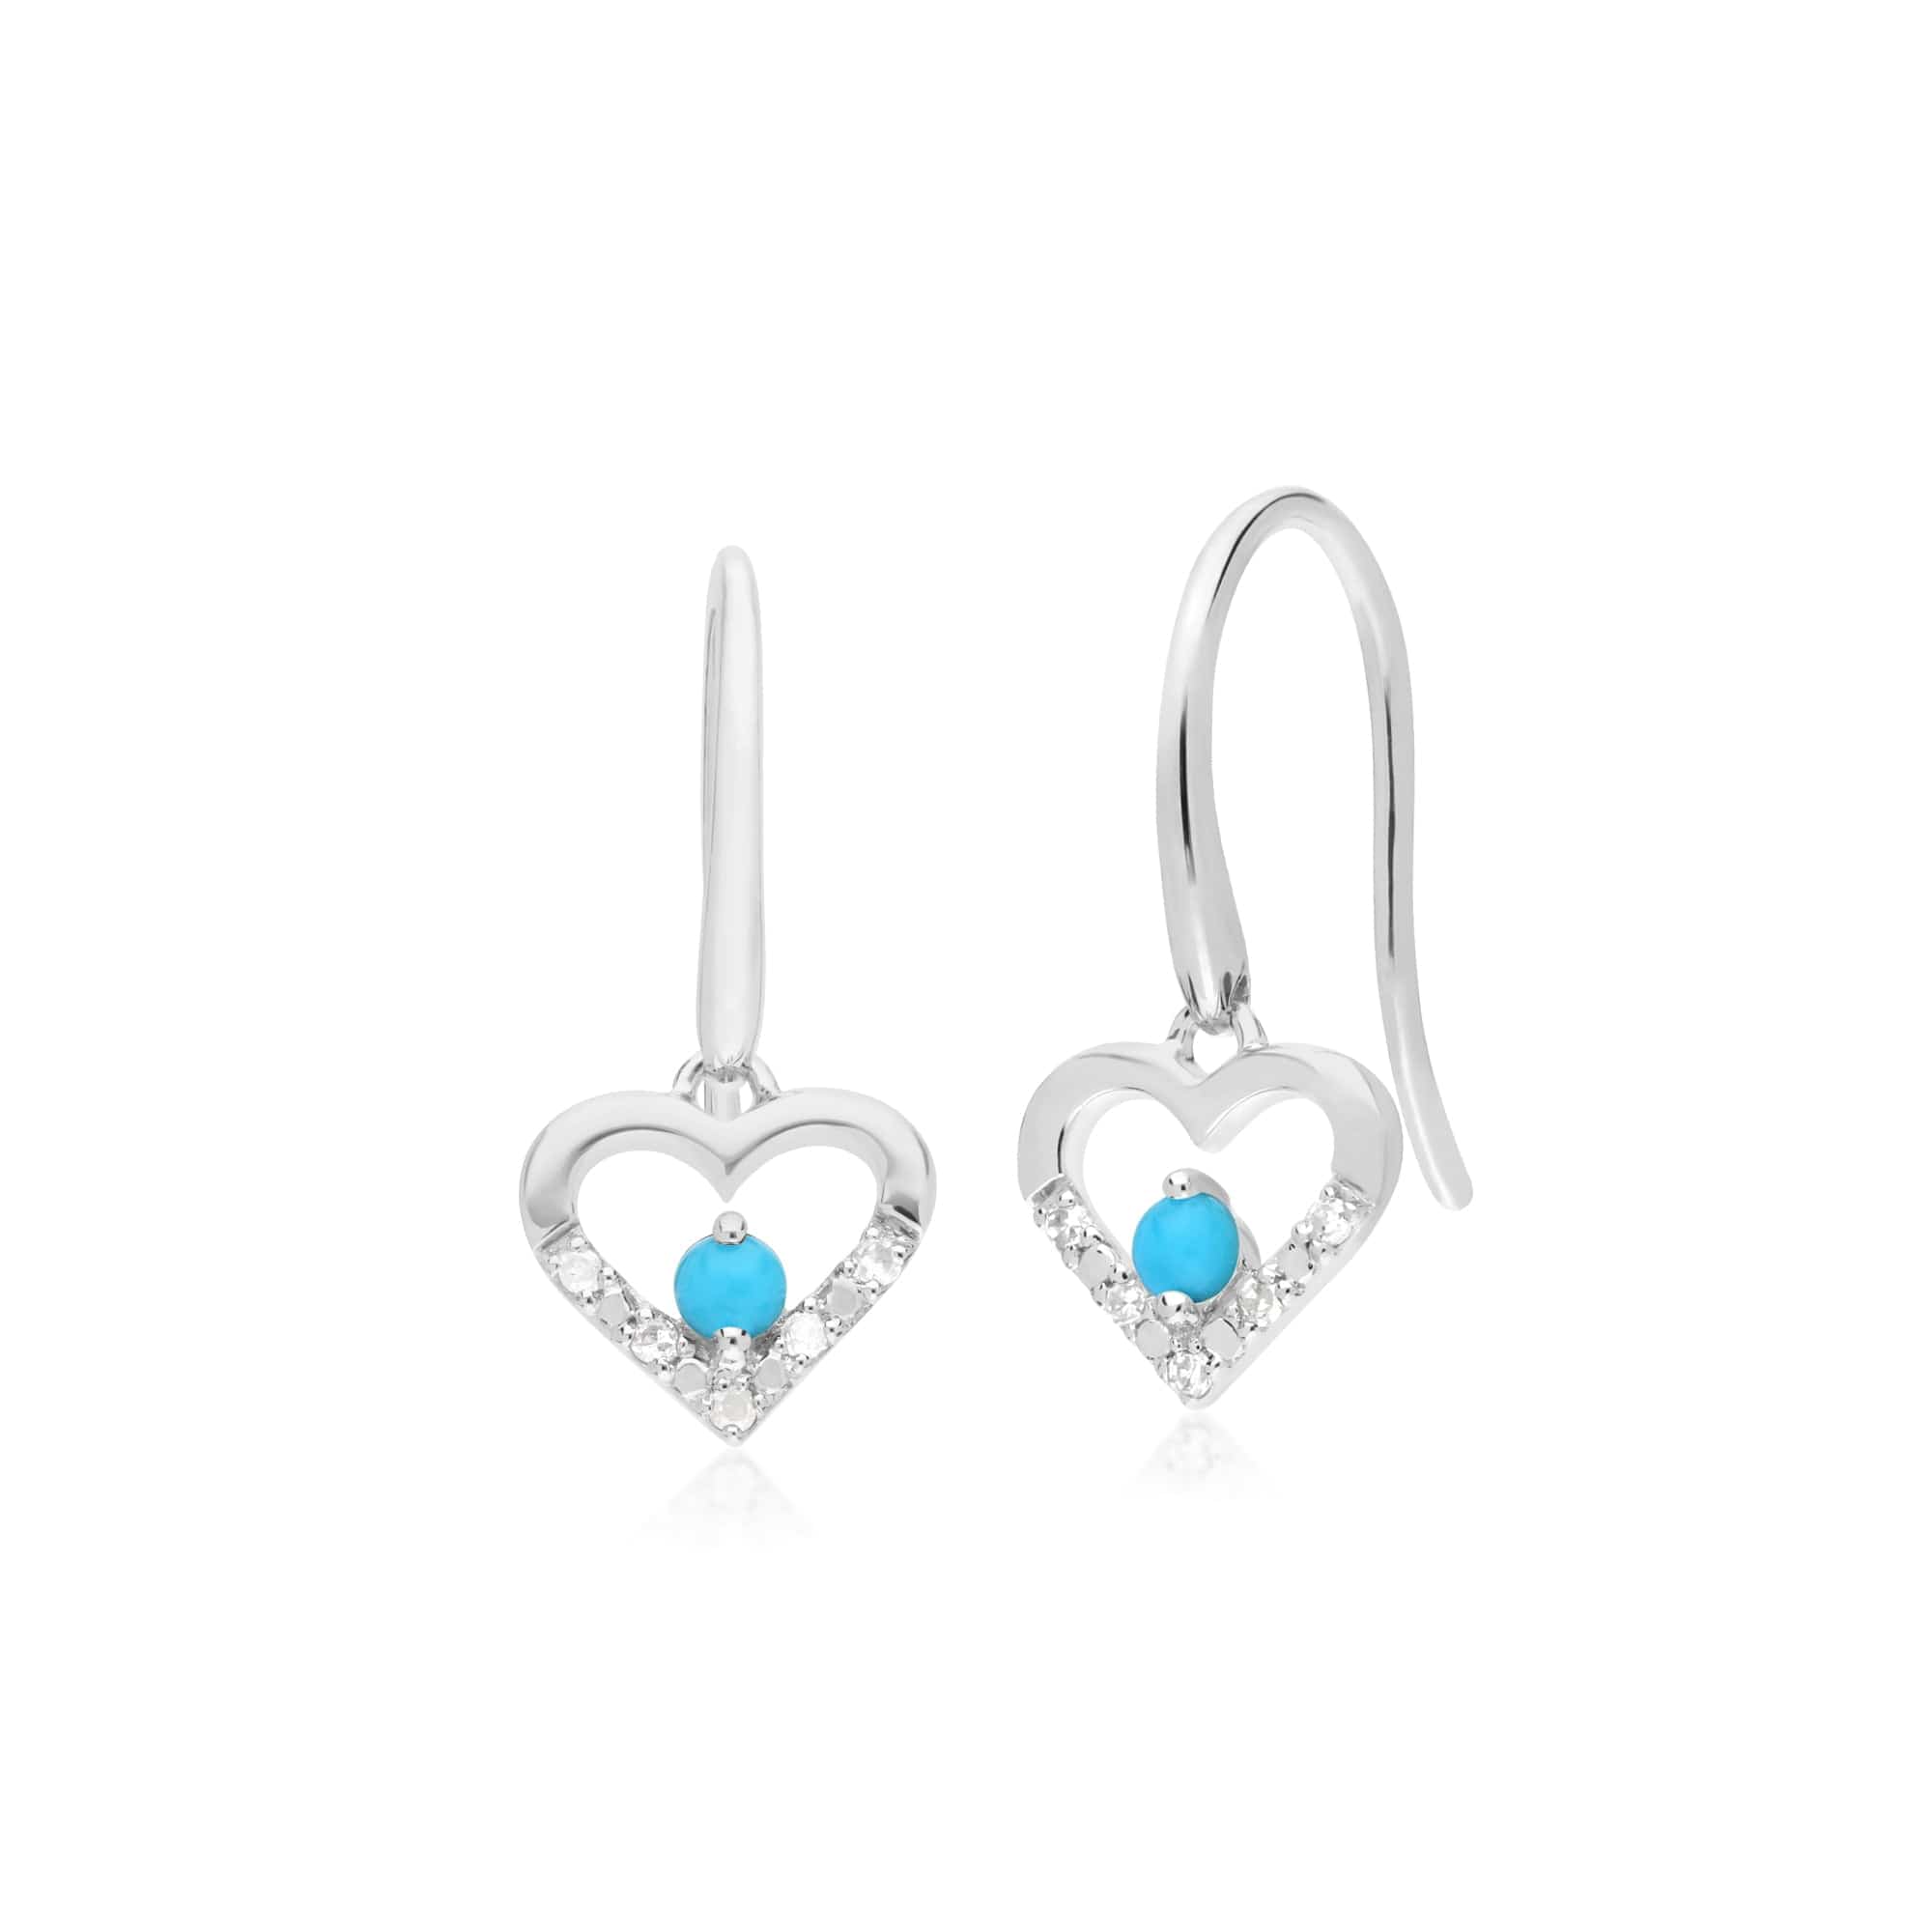 162E0260019-162P0221019 Classic Round Turquoise & Diamond Heart Drop Earrings & Pendant Set in 9ct White Gold 2